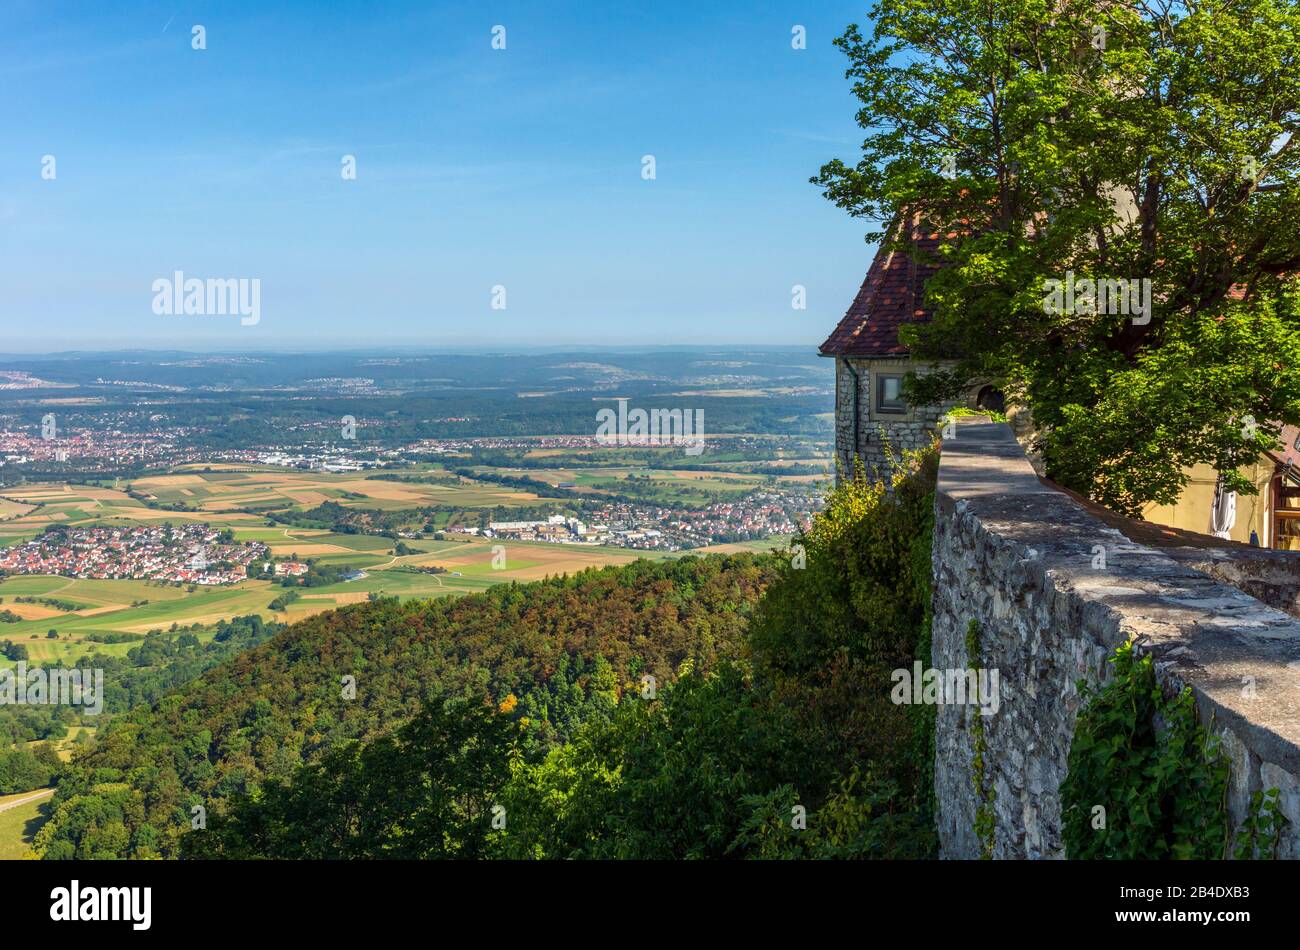 Germany, Baden-Württemberg, Owen, view from the Teck castle ruin to the foothills of the Alb at Kirchheim / Teck, Swabian Alb Stock Photo